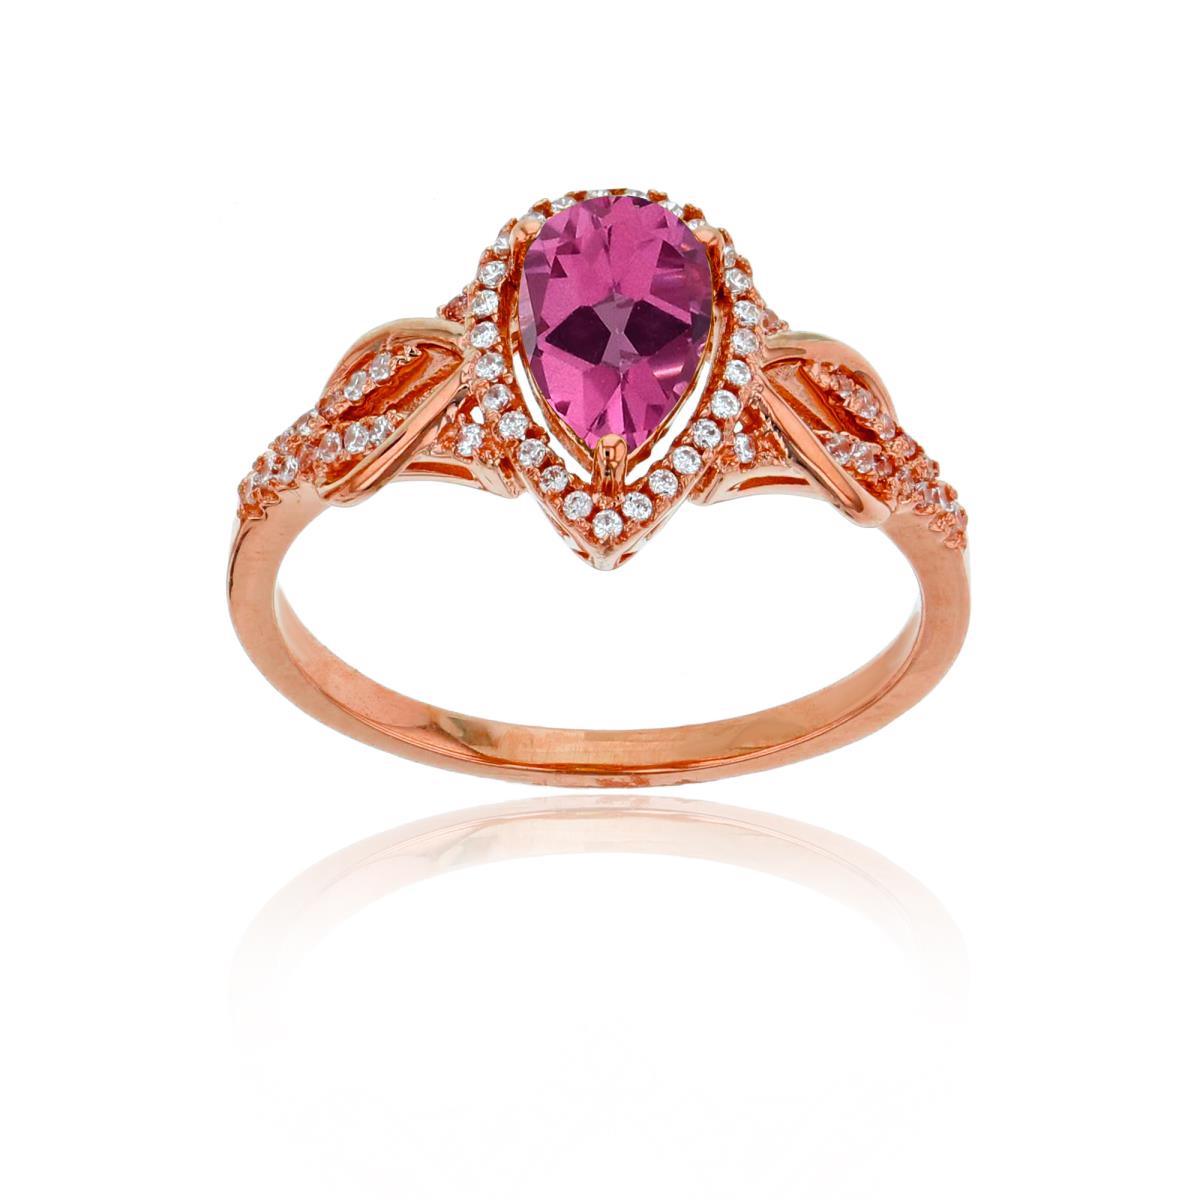 14K Rose Gold 0.17CTTW Rnd Diamond & 8x5mm Pear Cut Created Pink Sapphire Knot Sides Ring